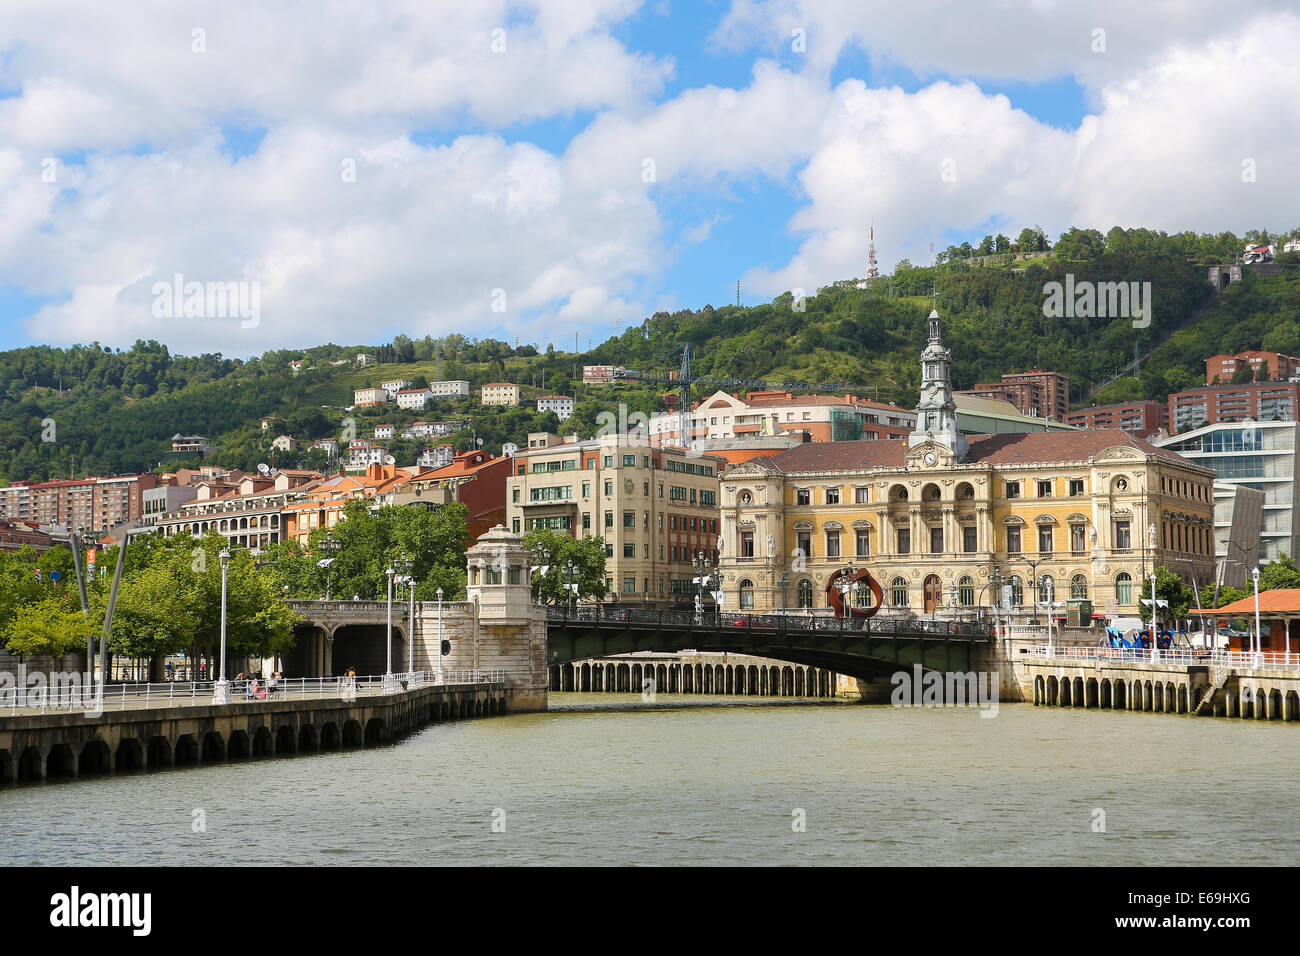 BILBAO, SPAIN - JULY 10, 2014: View on the center of Bilbao, Basque country, Spain. Stock Photo